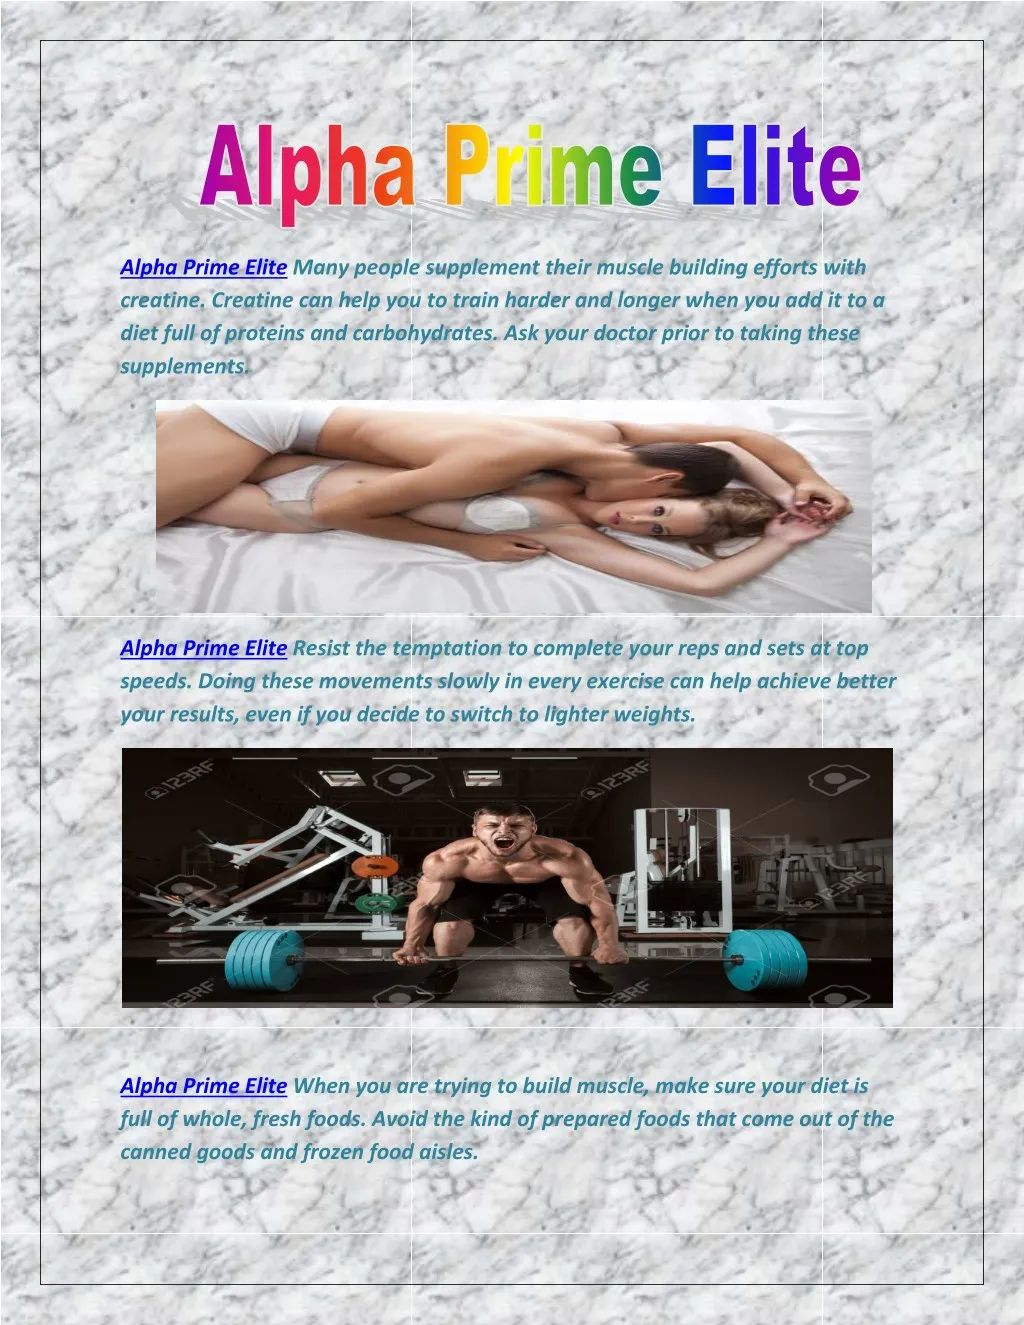 alpha prime elite many people supplement their